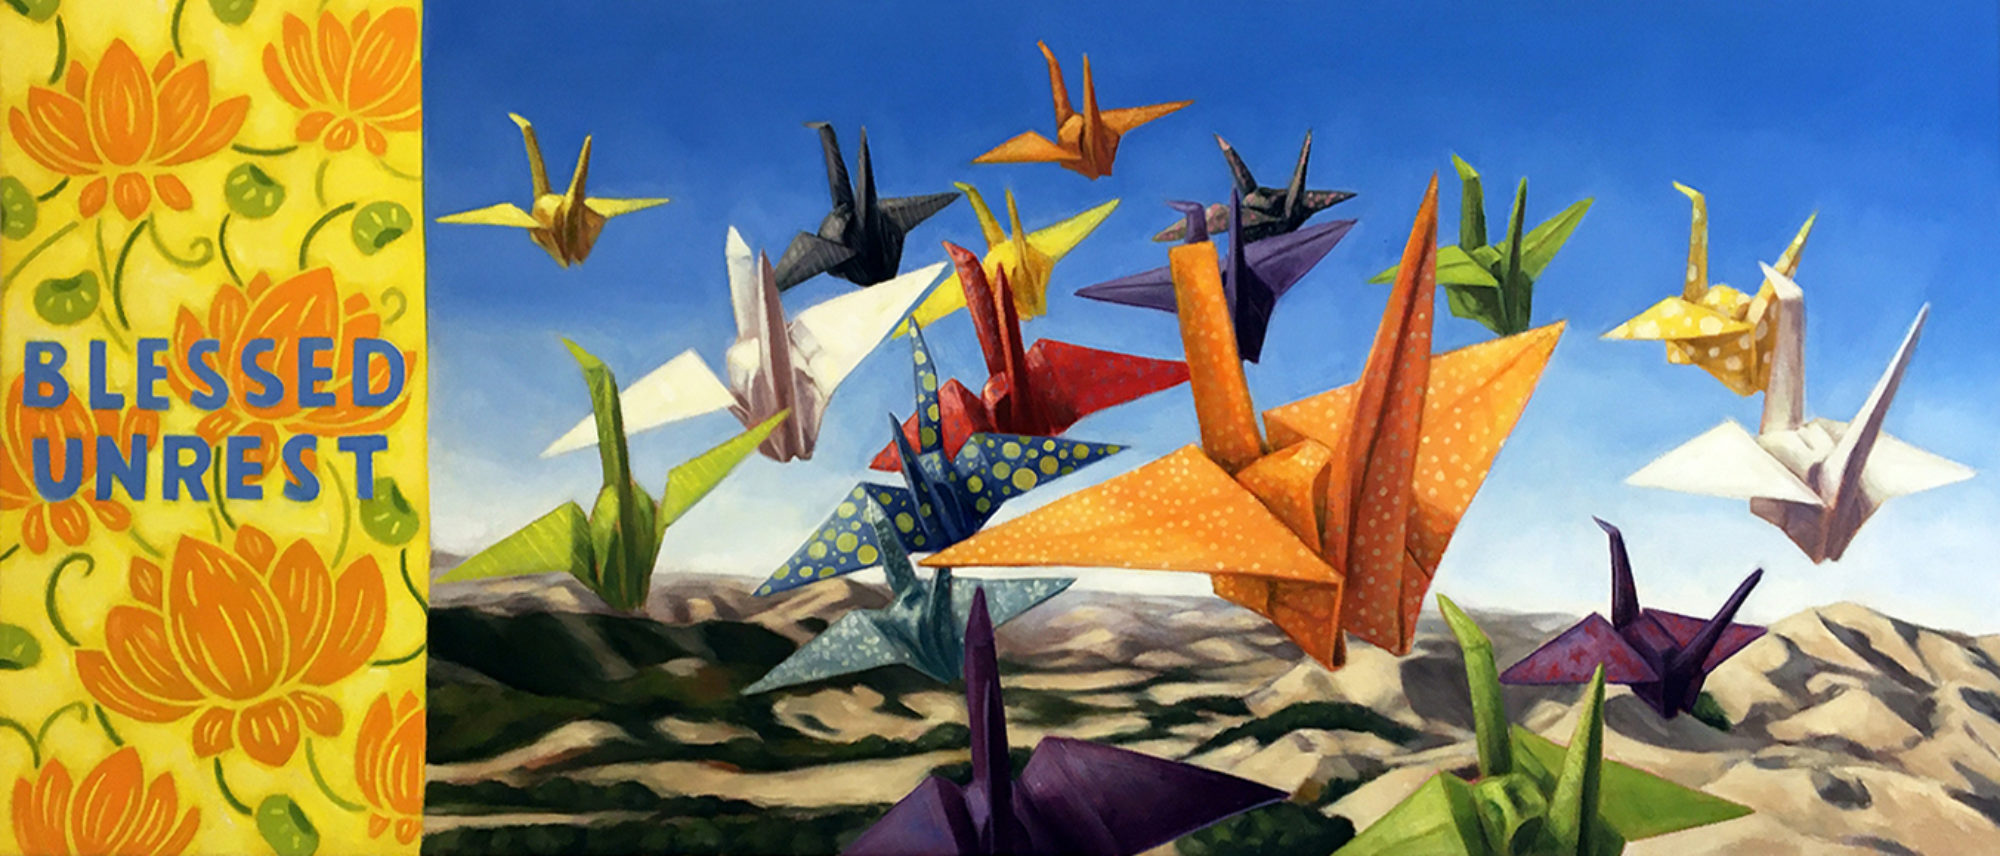 Painting of many multi-colored paper cranes flying above a mountainous landscape. The words " Blessed Unrest" painting on the left hand side over a pattern of orange flowers on a yellow background.